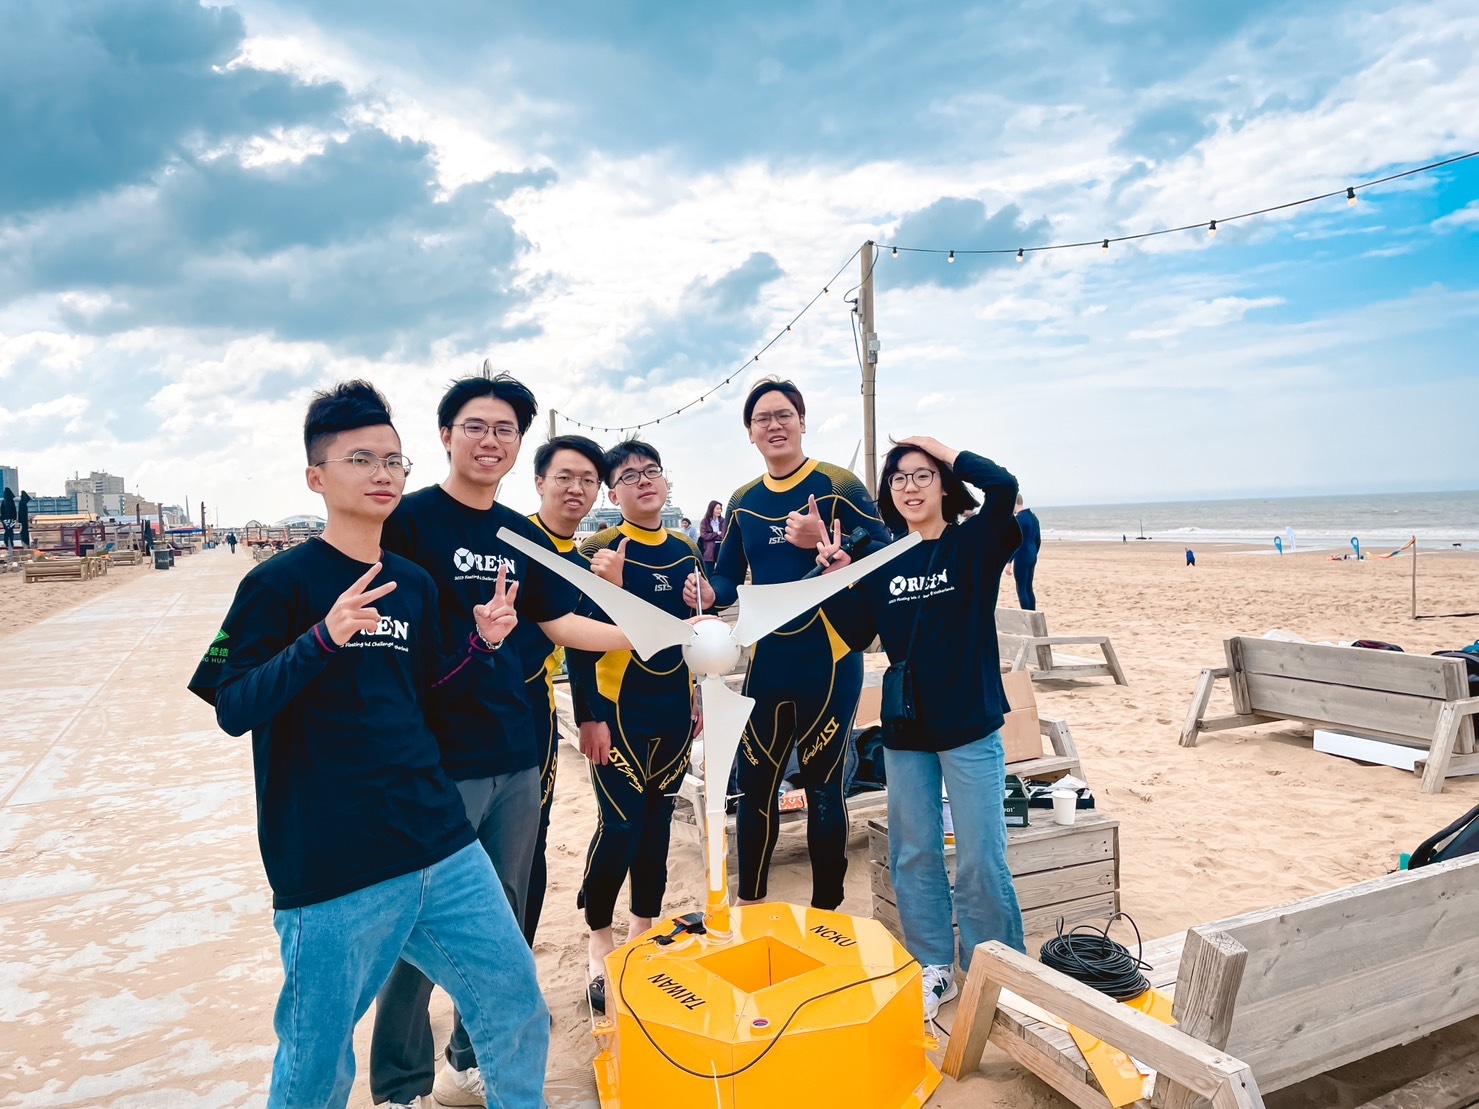 Flying over 10,000 km – NCKU Students Win Double International Recognition in North Sea Floating Wind Challenge.